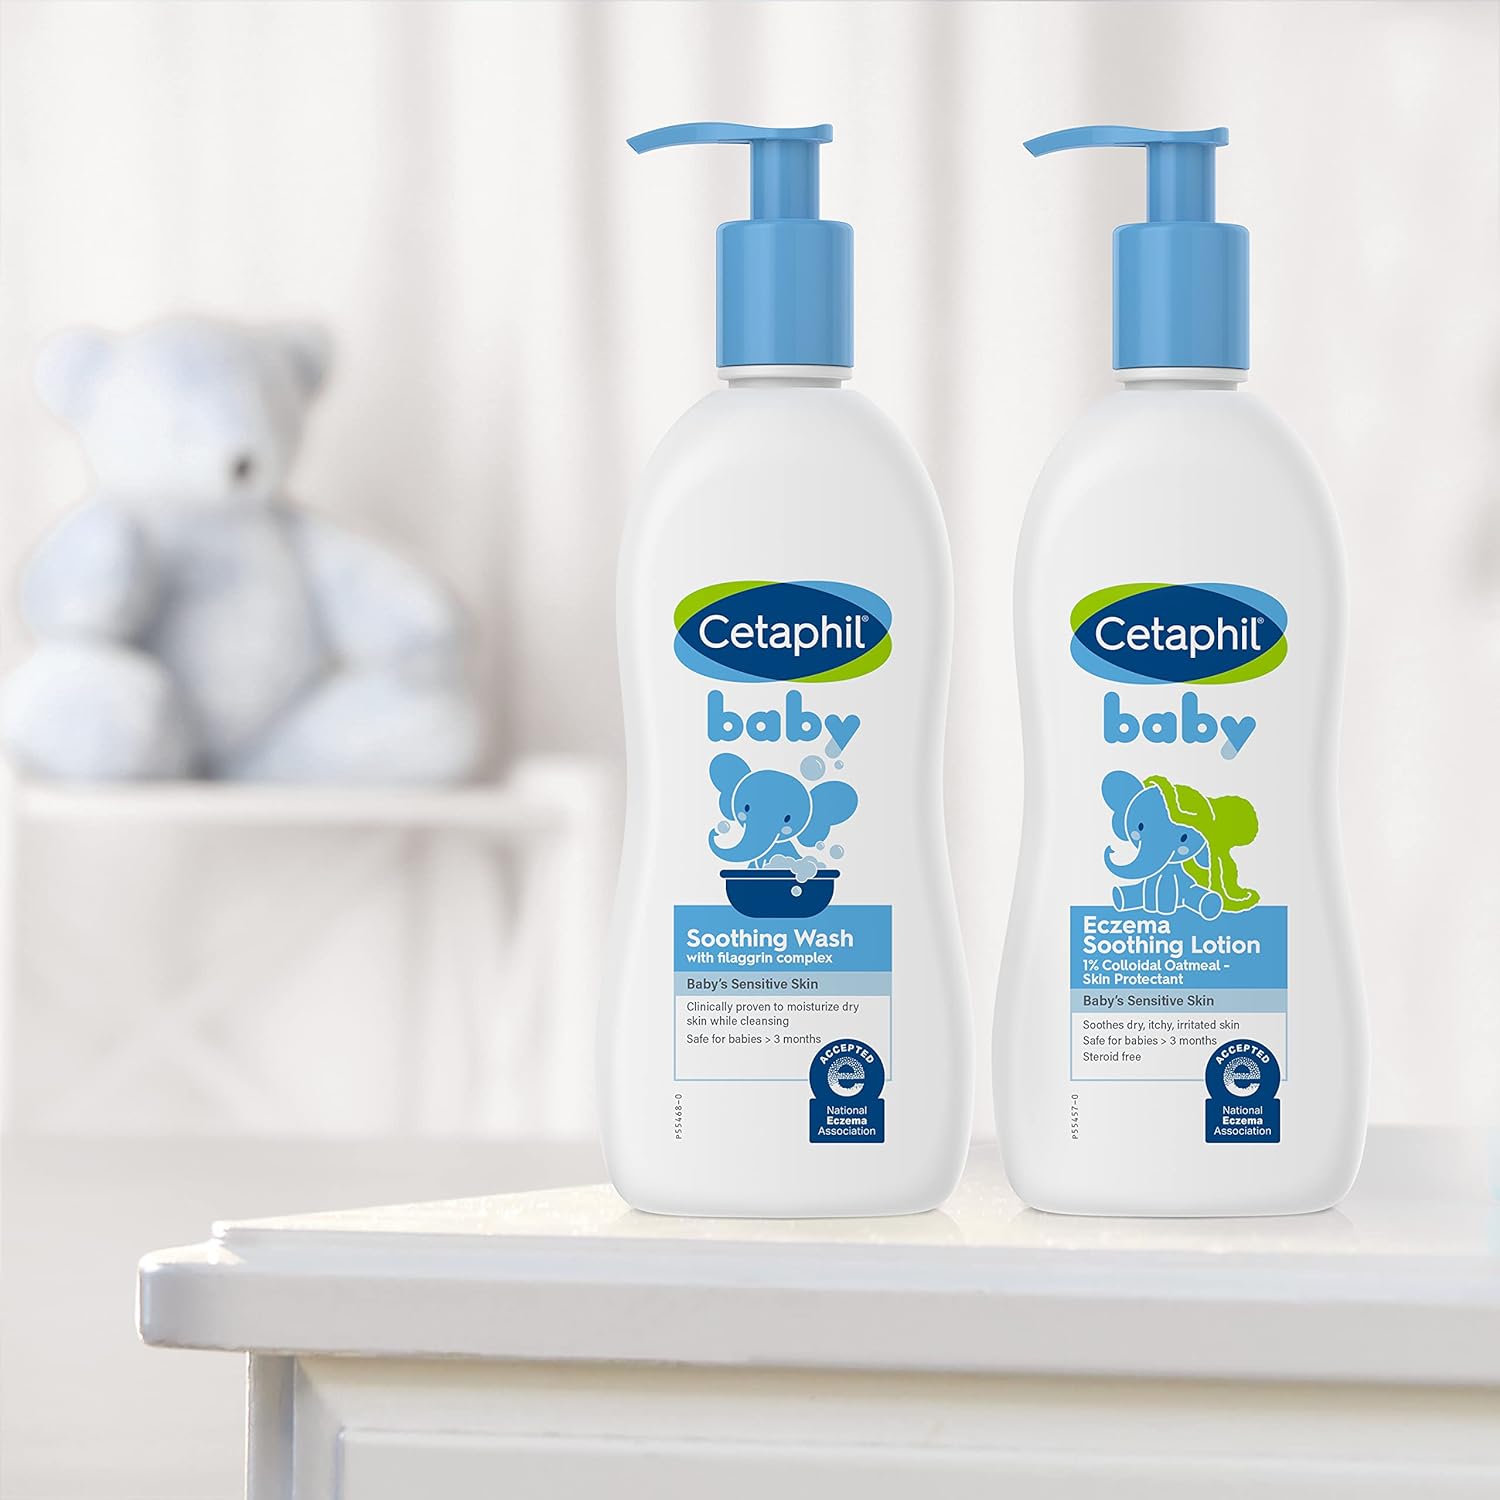 Cetaphil Baby Eczema Soothing Lotion with Colloidal Oatmeal, For Dry, Itchy and Irritated Skin, 5 Fl. Oz : Baby